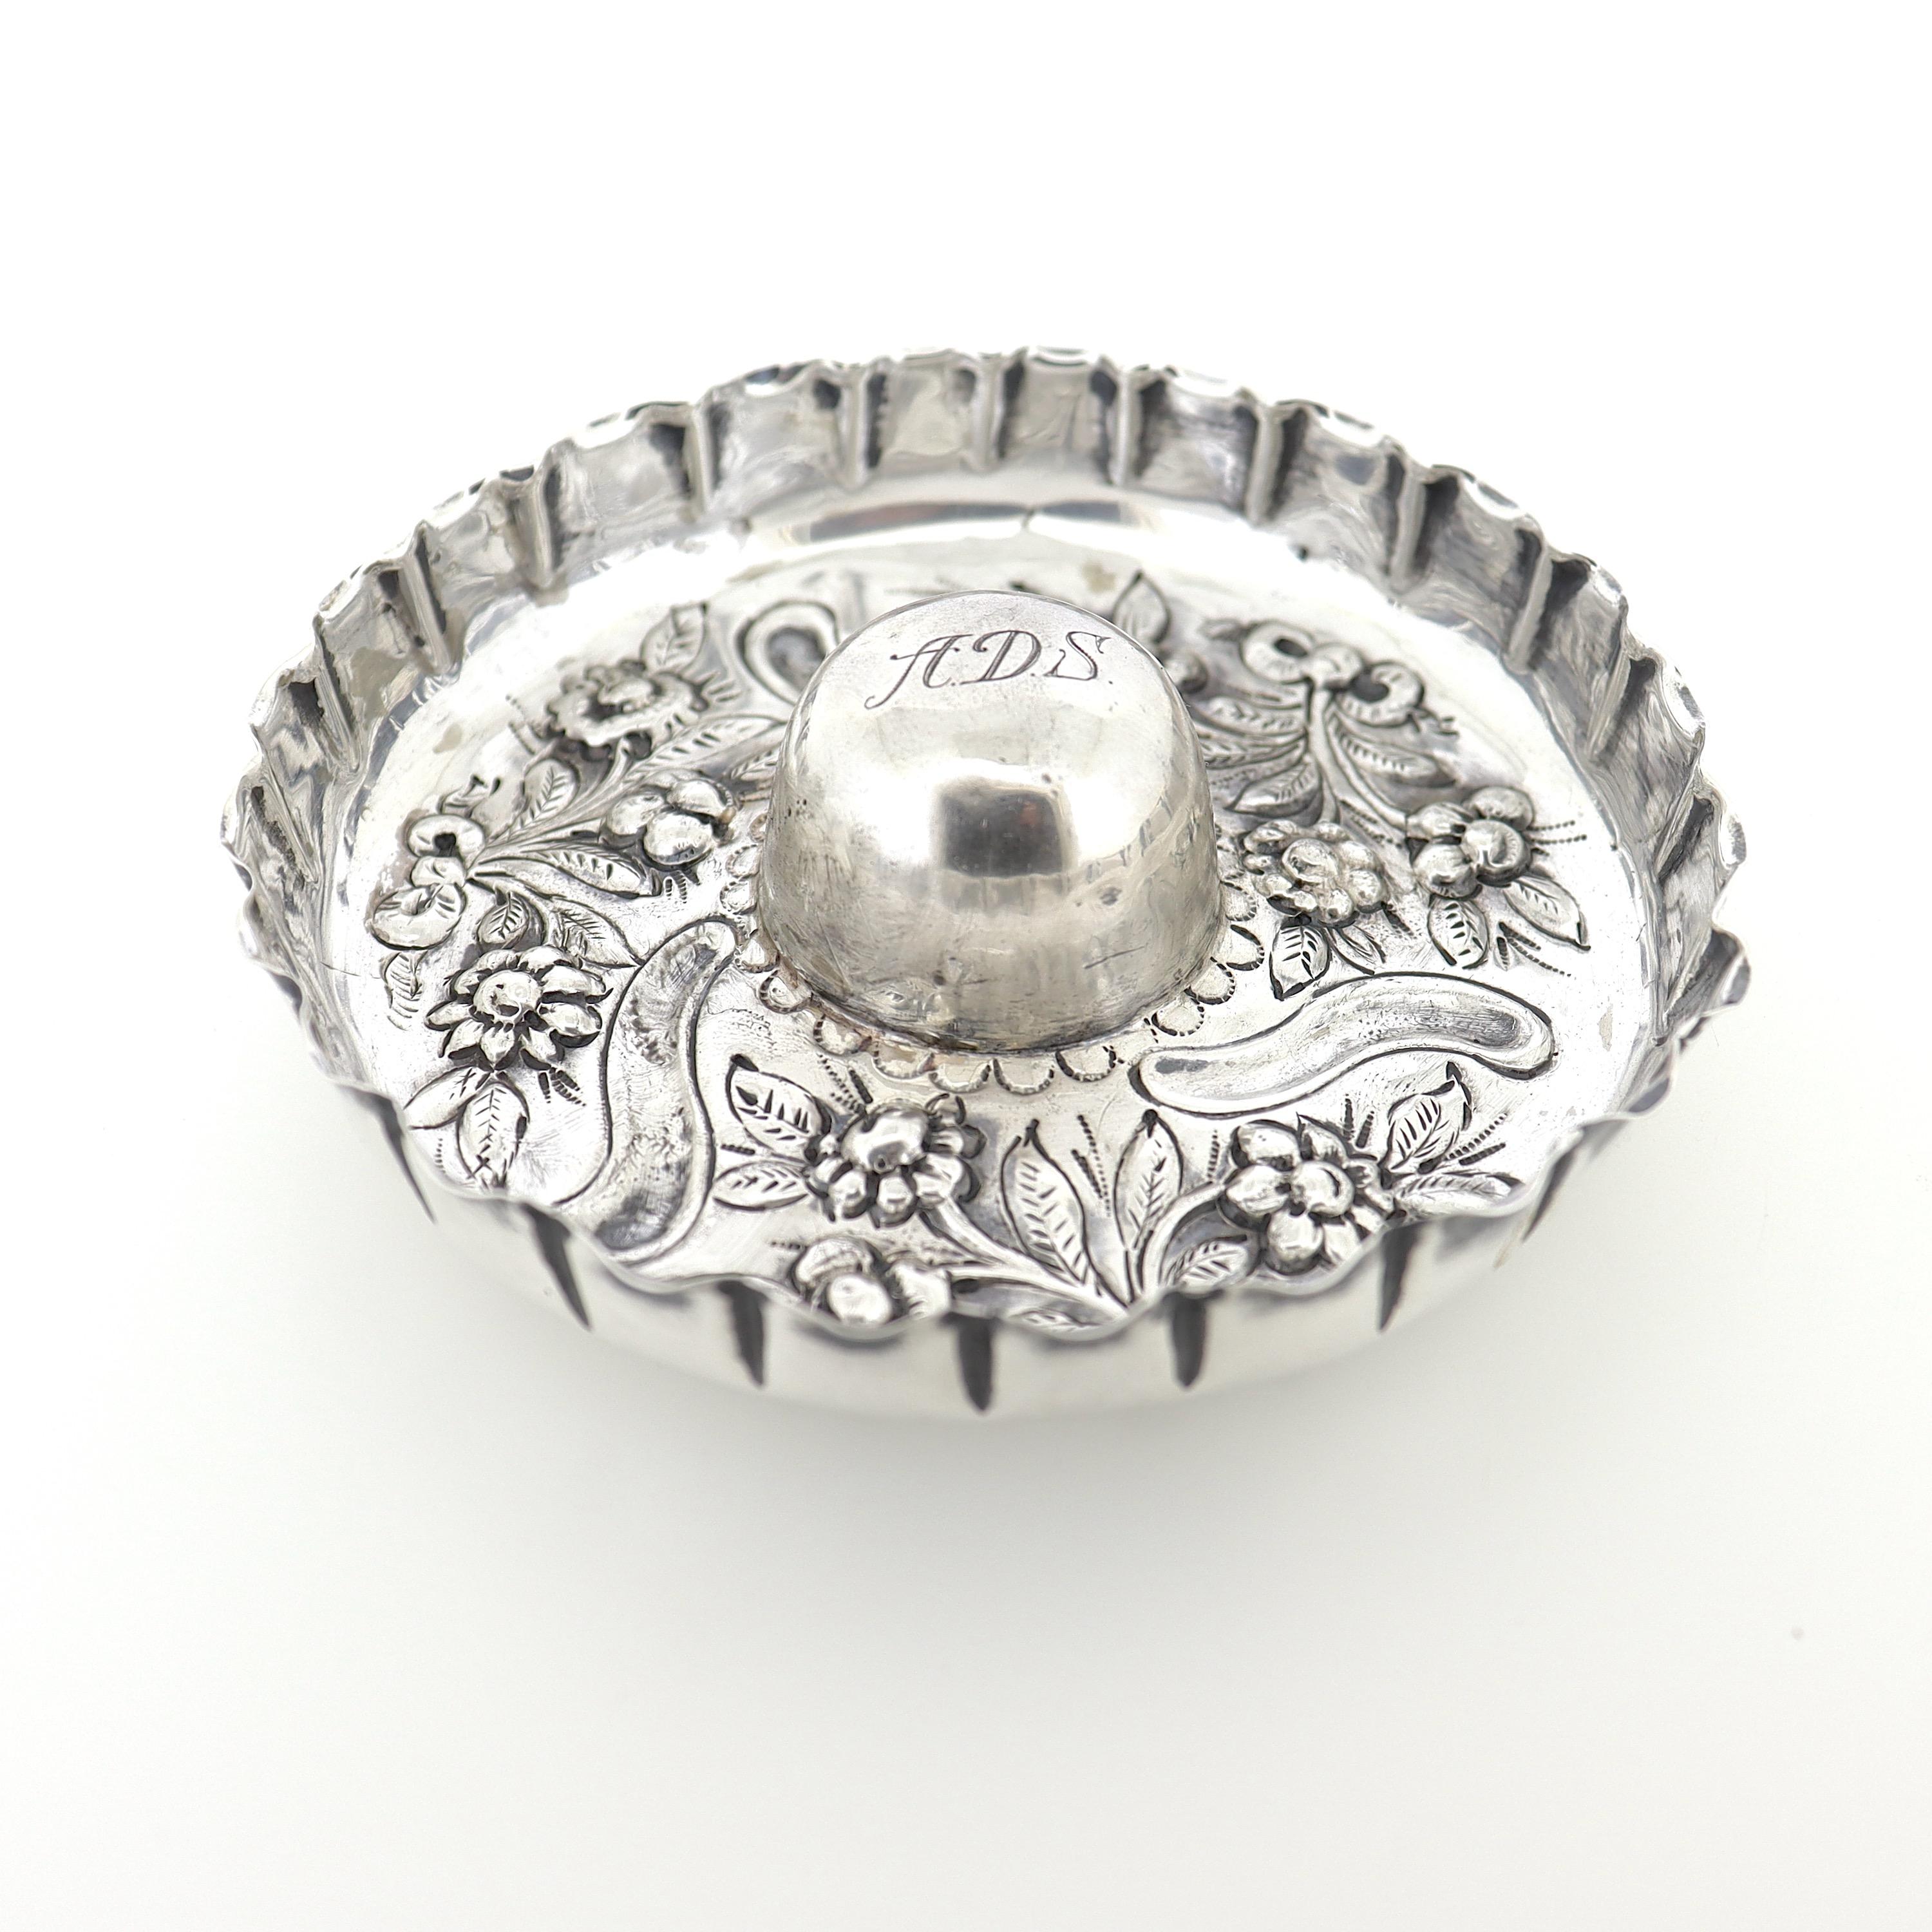 A fine antique English sterling silver ring stand.

By William Comyns. 

With a scalloped edge and repousse floral designs.

The ring nub is monogrammed 